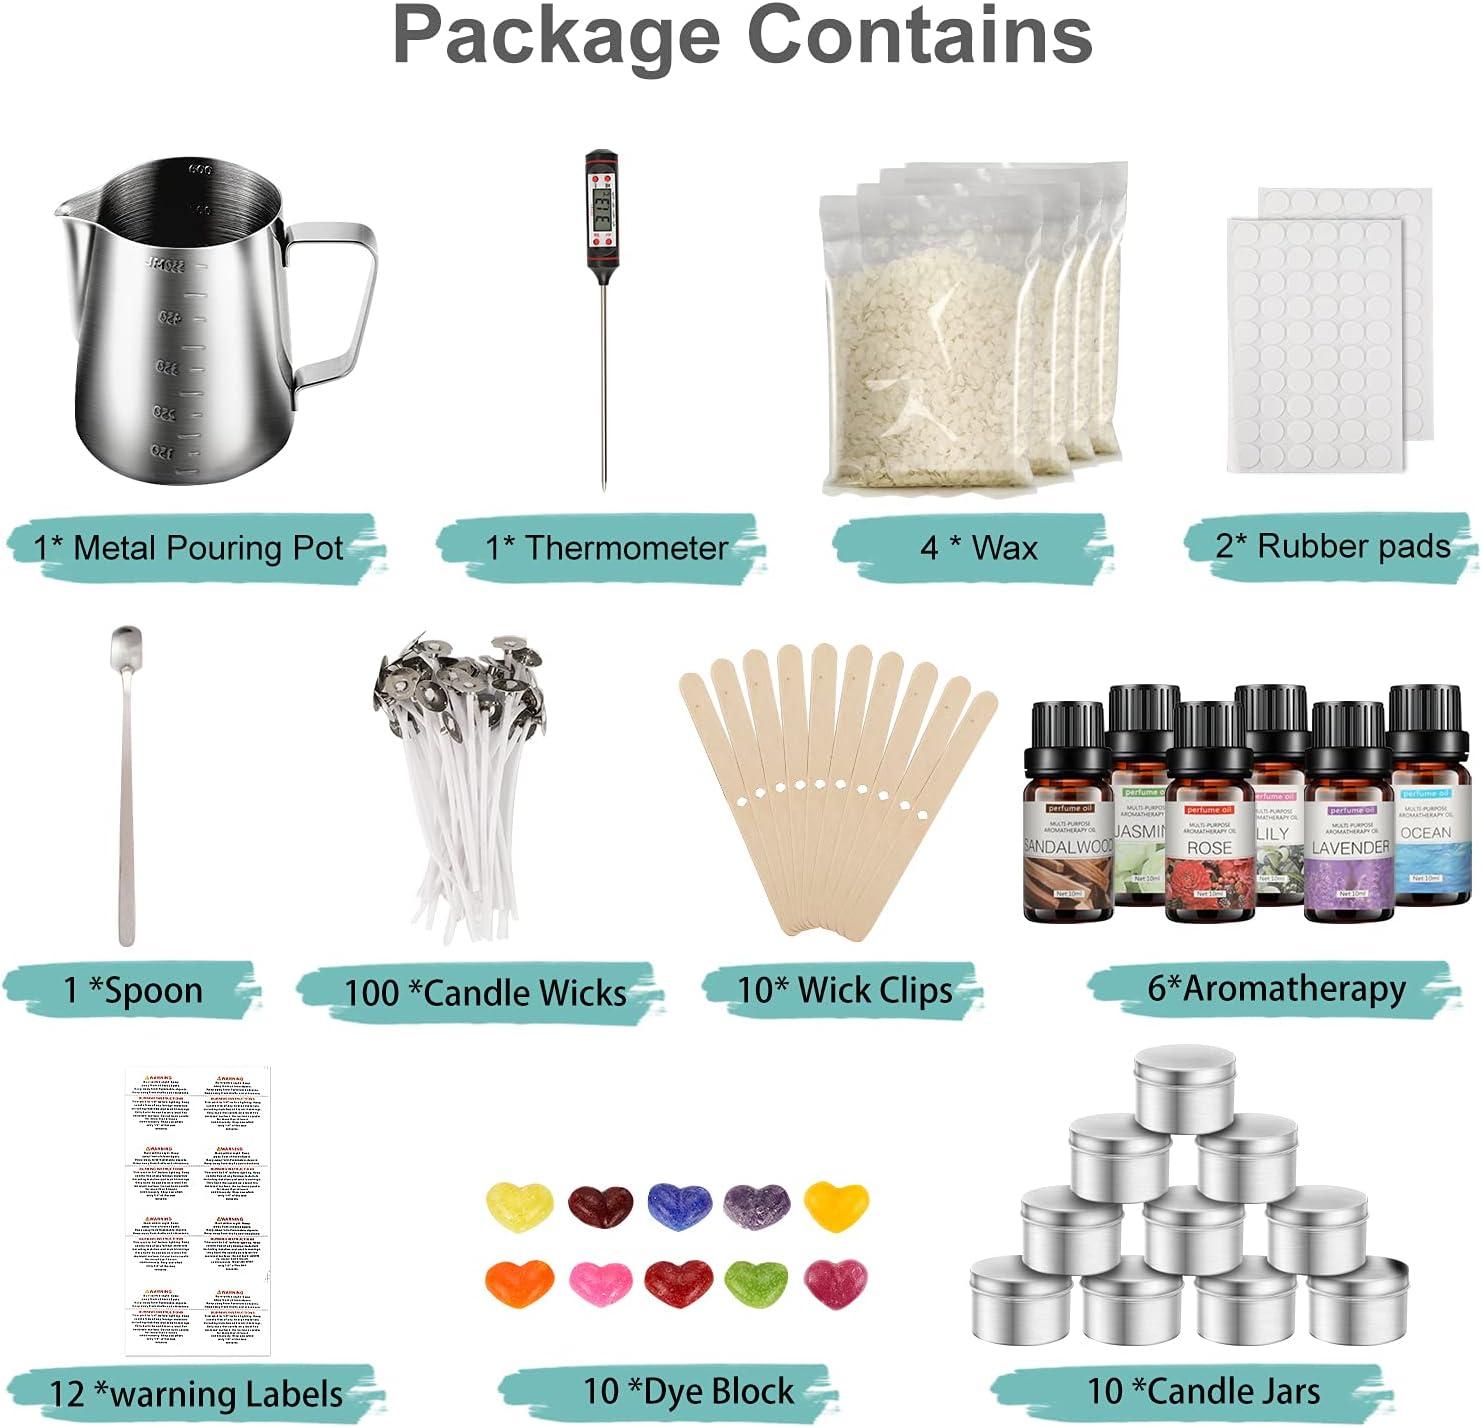 Candle Making Kit With Wax Melter, Candle Making Supplies, DIY Arts&crafts  Kits Gift for Beginners,adults,kids,including Electric Stove 